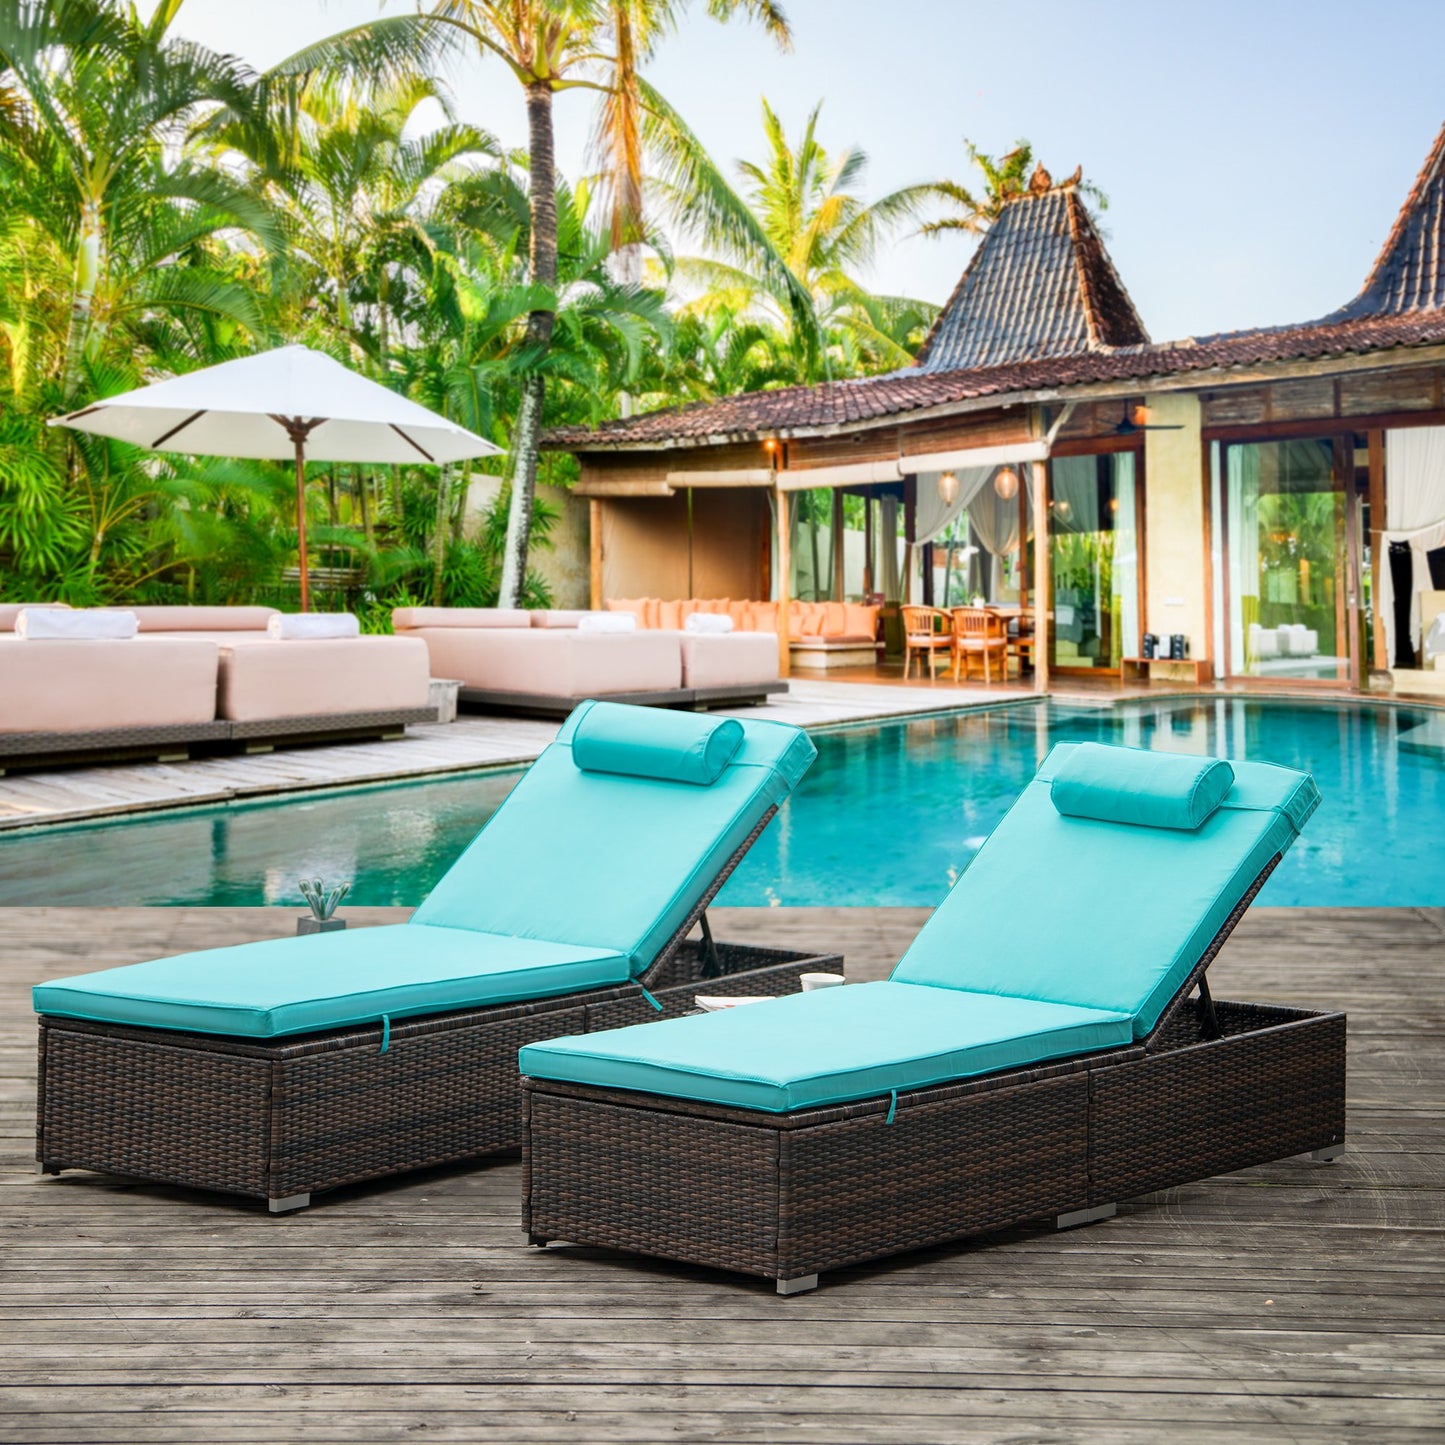 3 Pieces Outdoor Patio PE Wicker Chaise Lounge Set, Adjustable Reclining Lounge Chairs with Matching Table, Outdoor Sun Lounger with Removable Cushions for Patio Poolside Backyard Porch Garden, B23